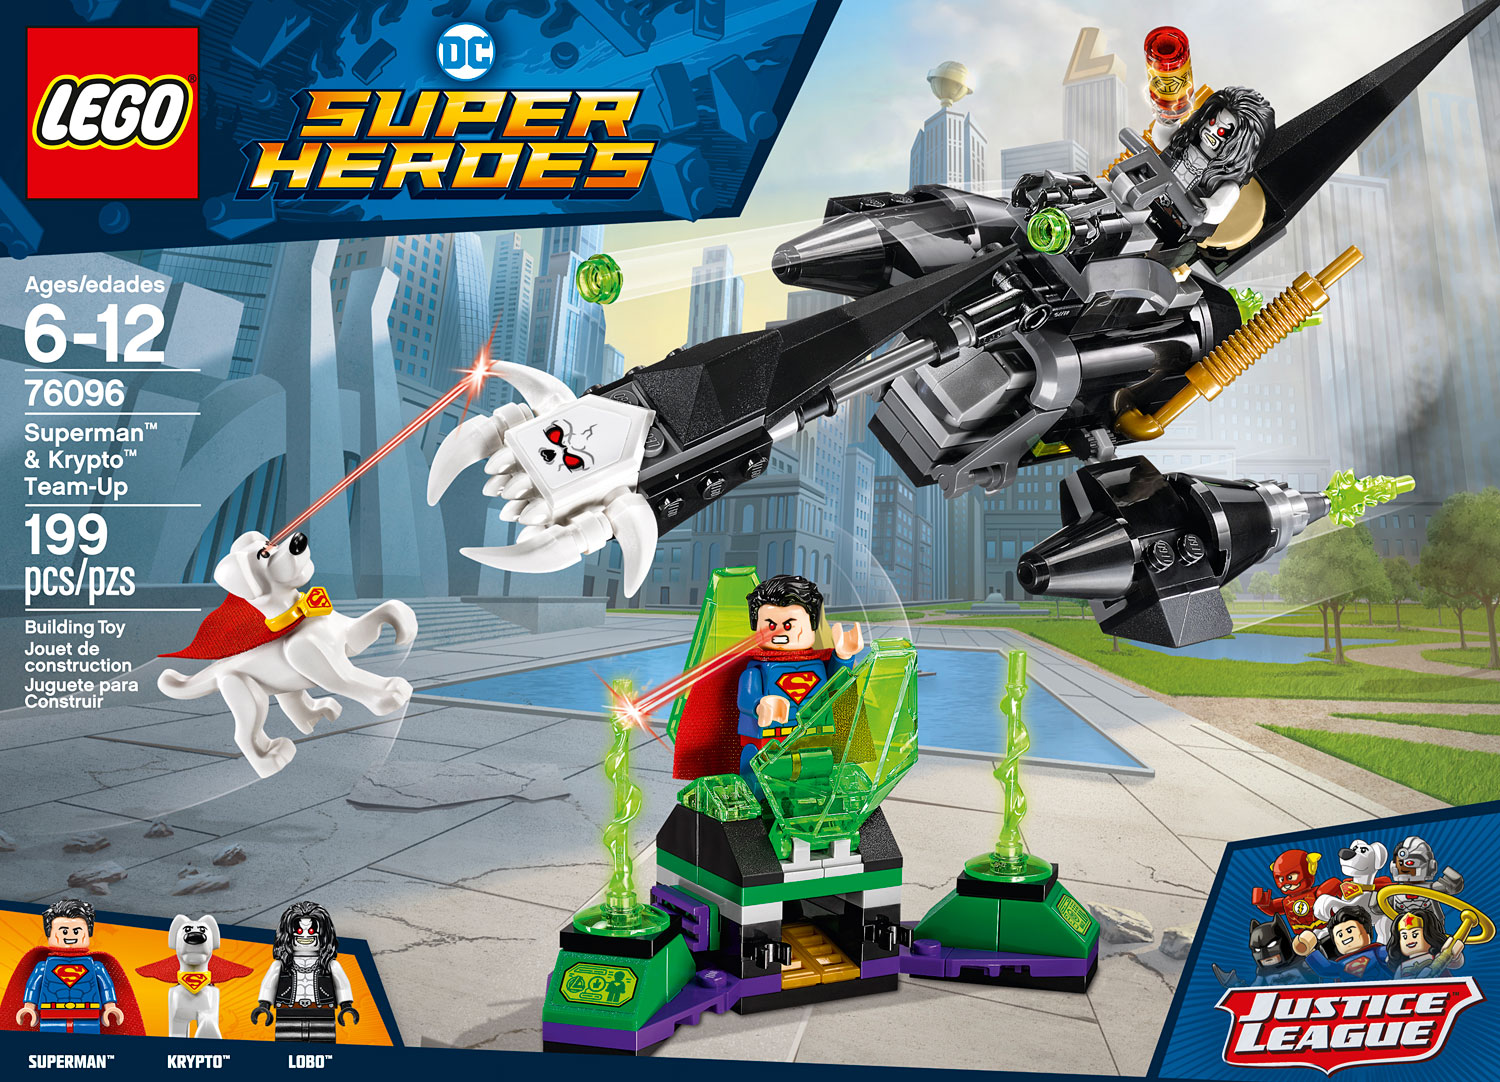 LEGO Super Heroes - Superman & Krypto Team-Up - Givens Books and Dickens